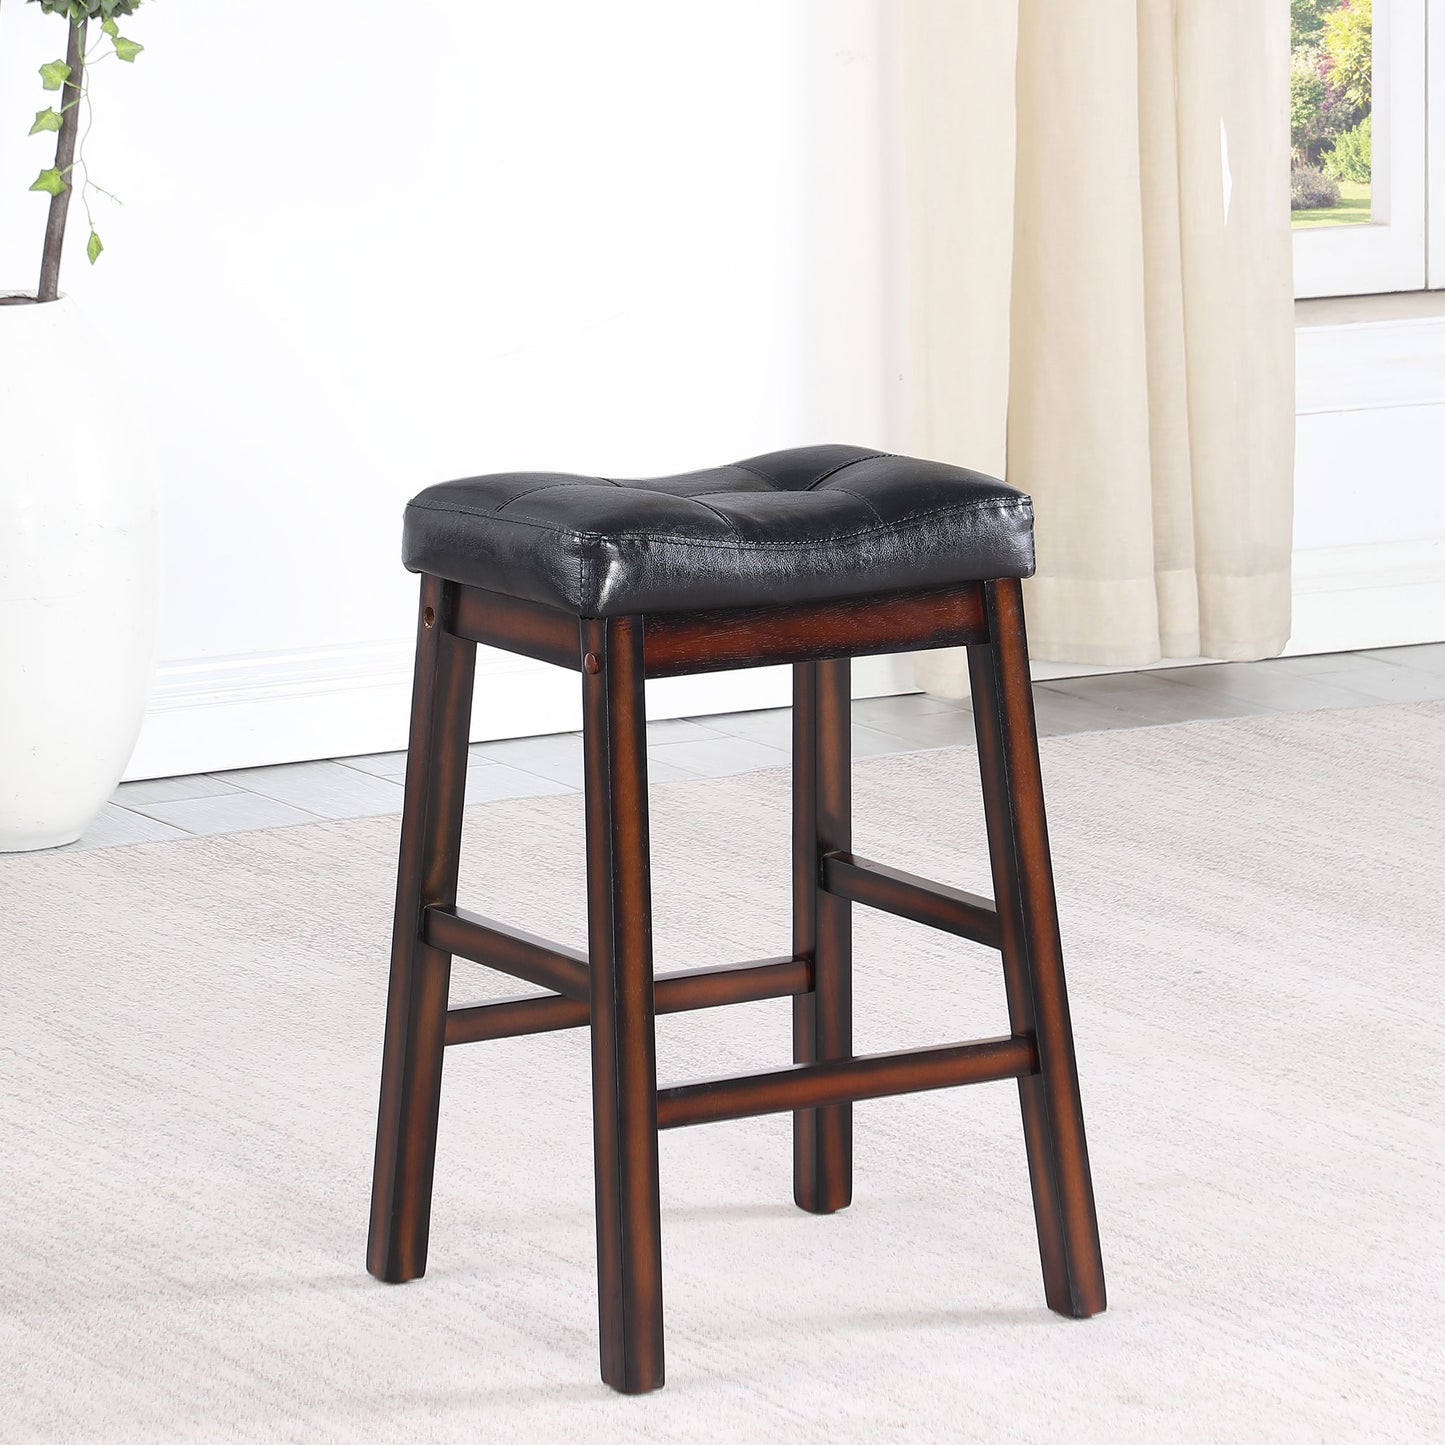 Donald Upholstered Counter Height Stools Black and Cappuccino (Set of 2)